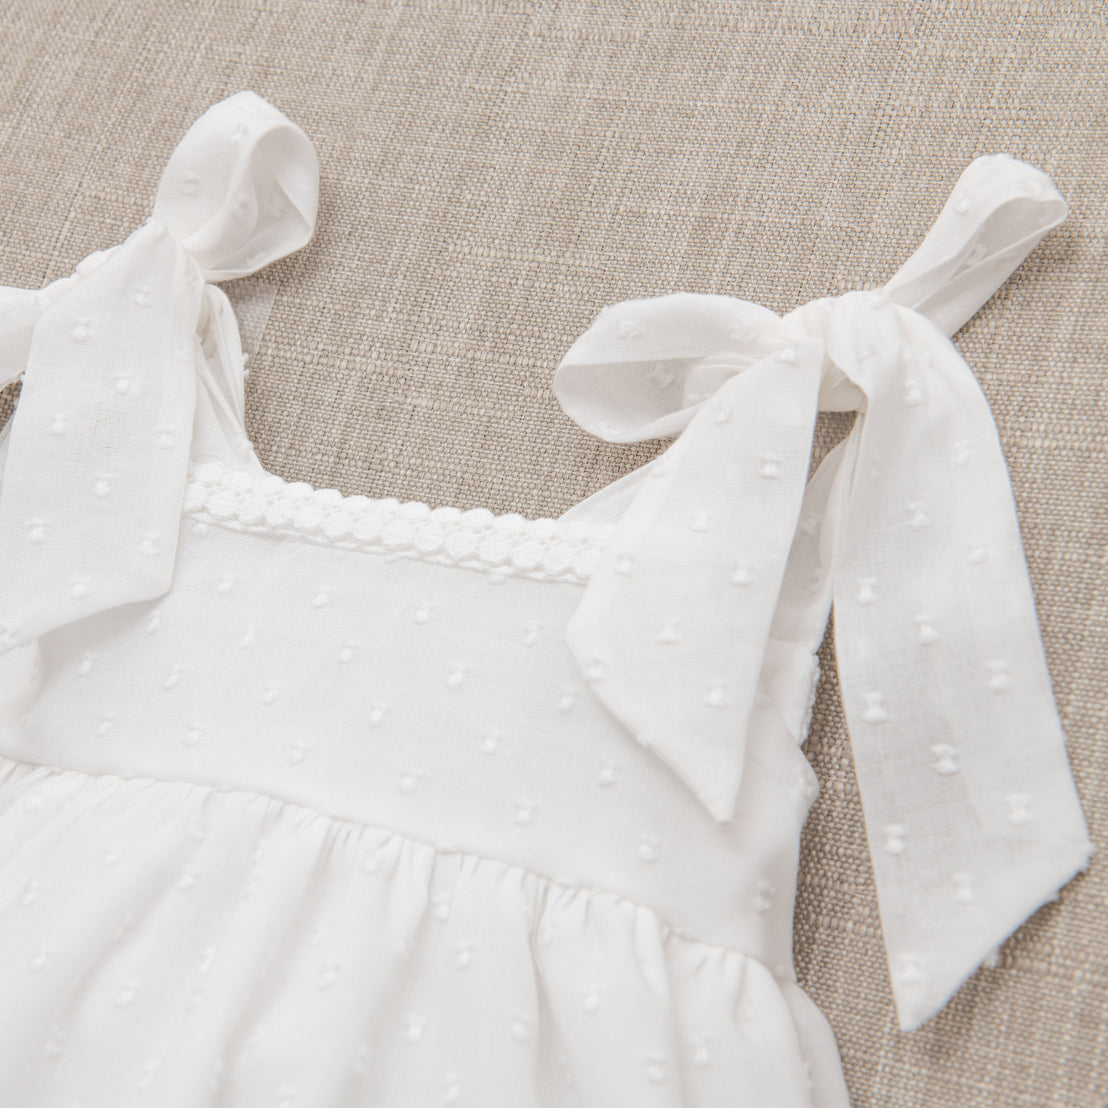 Close-up of Mila Cotton Gown made from Montreux Swiss Dot cotton, a textured dot pattern fabric, featuring a detailed neckline and ribbon-tied shoulder straps, displayed on a beige fabric background.